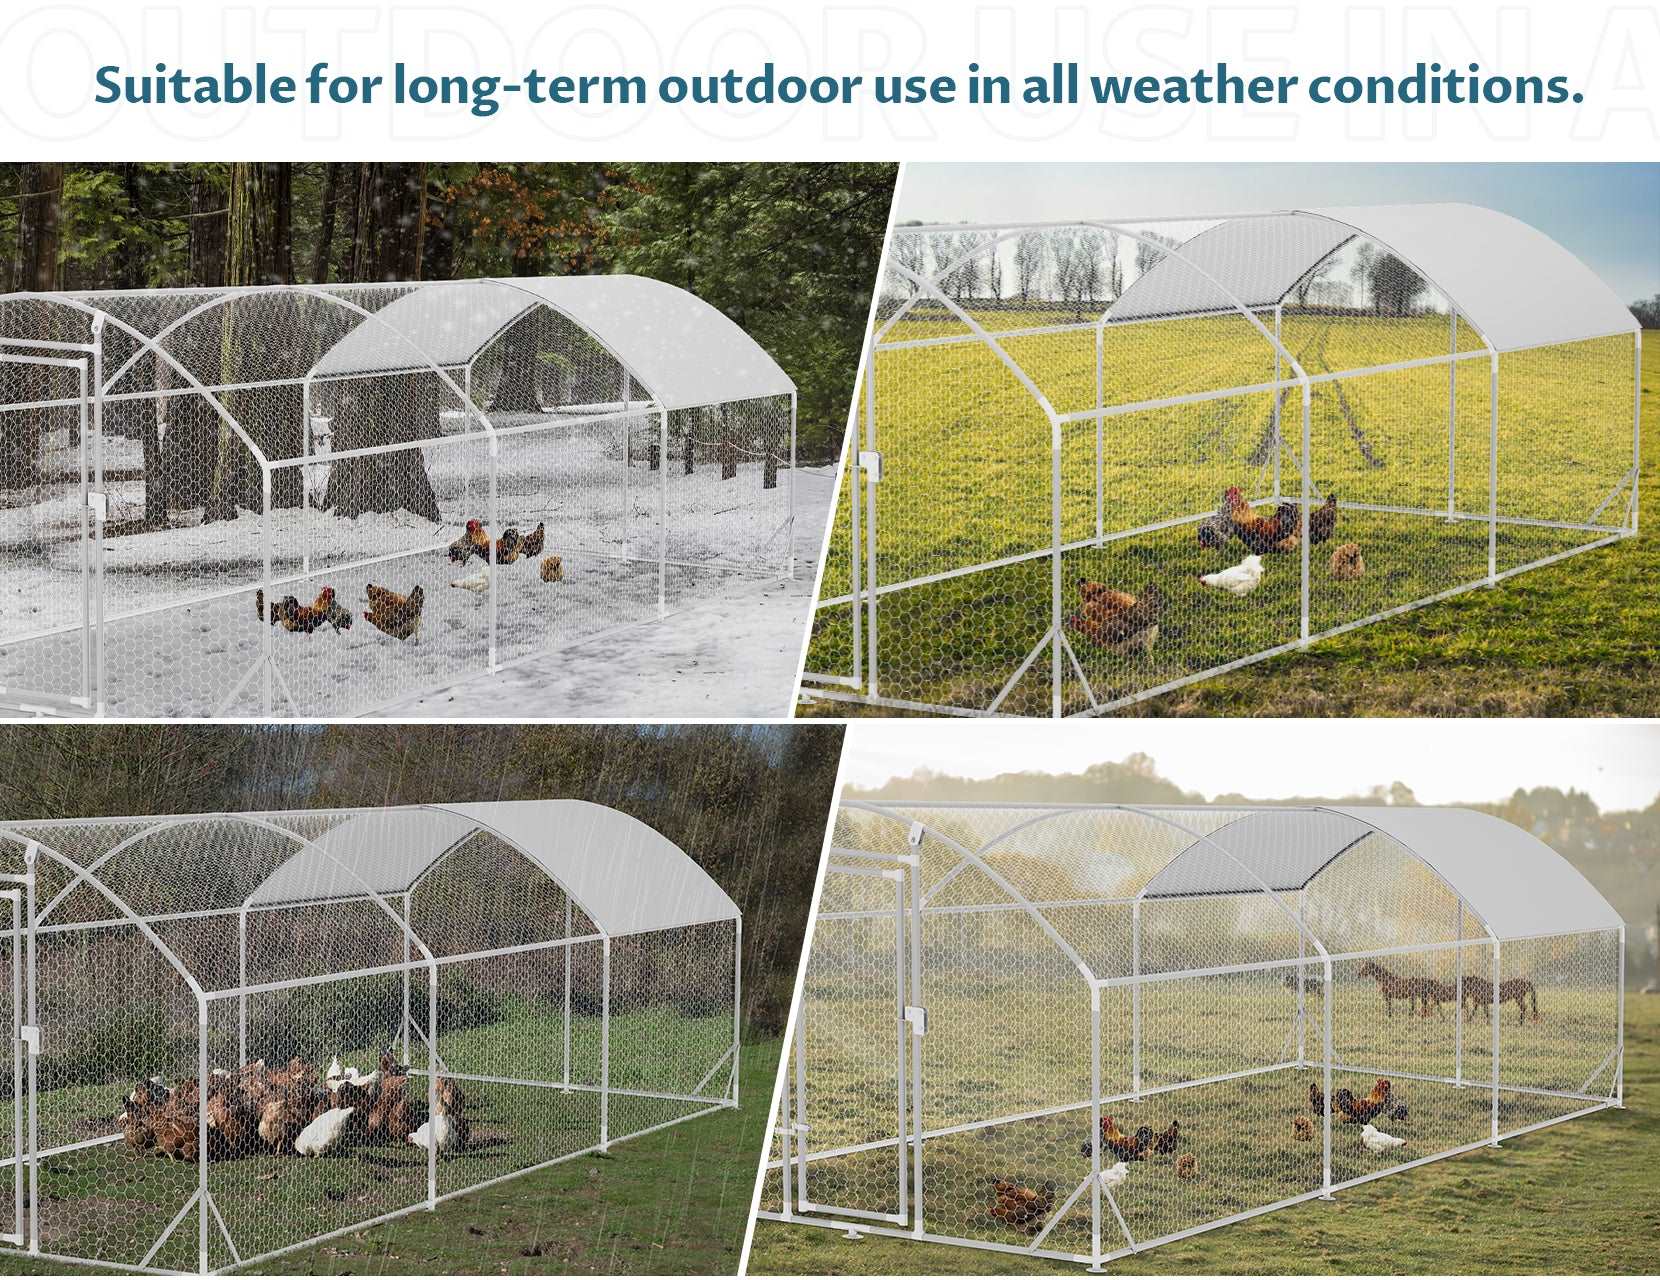 petsfit-chicken-coop-with-anti-rust-durable-steel-420d-anti-ultraviolet-waterproof-cover-large-walk-in-poultry-cage-chicken-pen-for-outdoor-farm-use-08